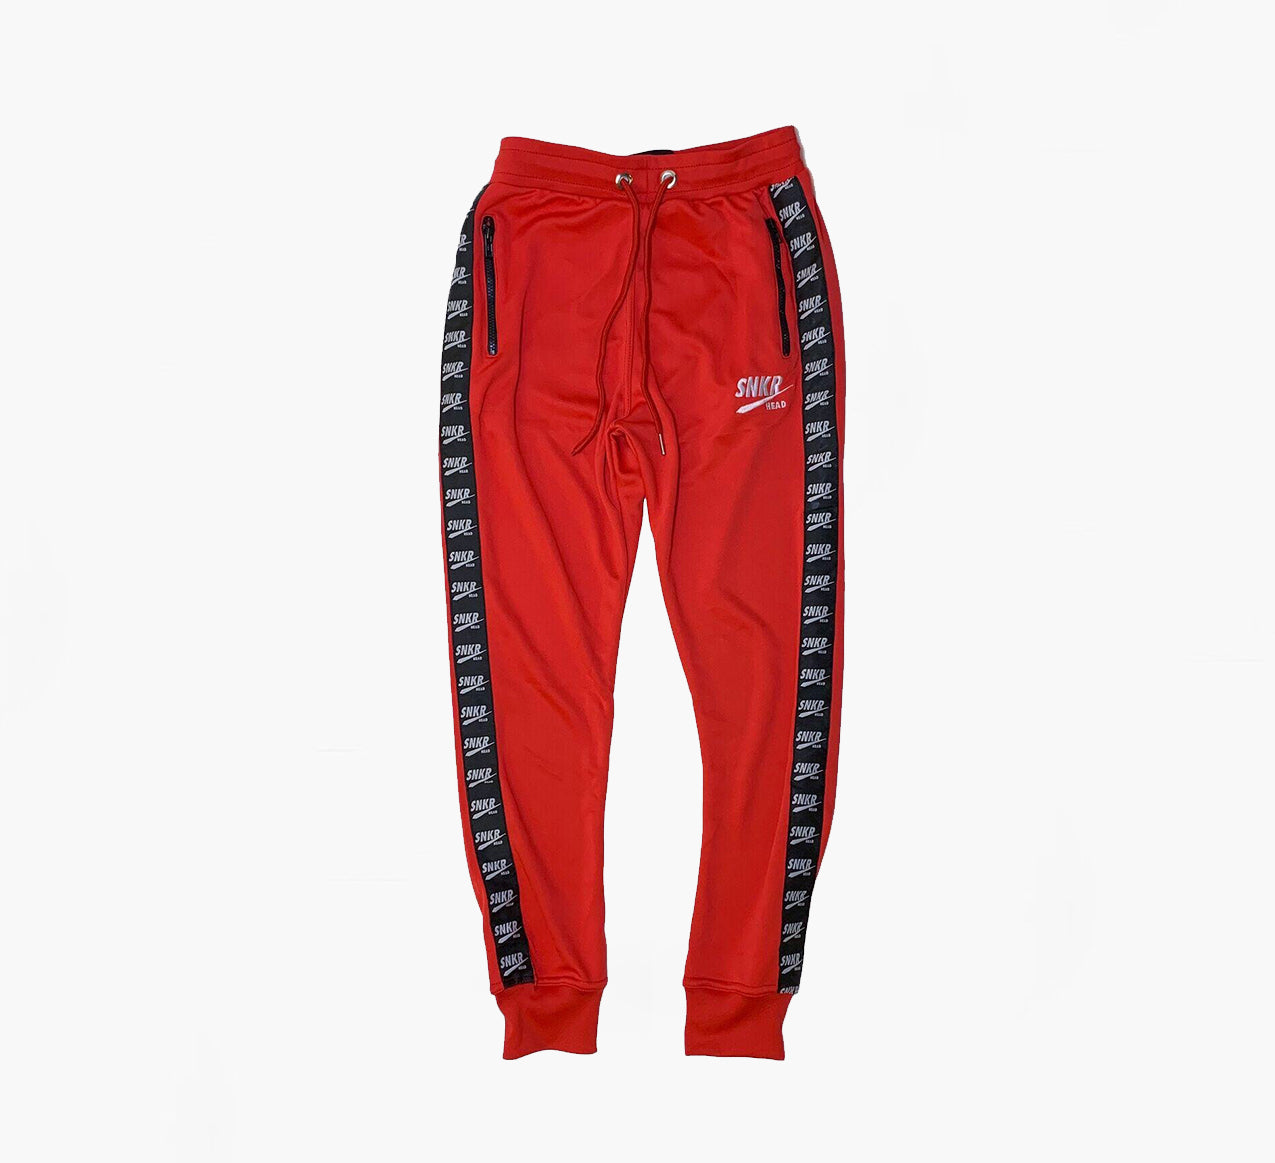 SNKR HEAD Hoodie & Jogger Logo Taped Red Set